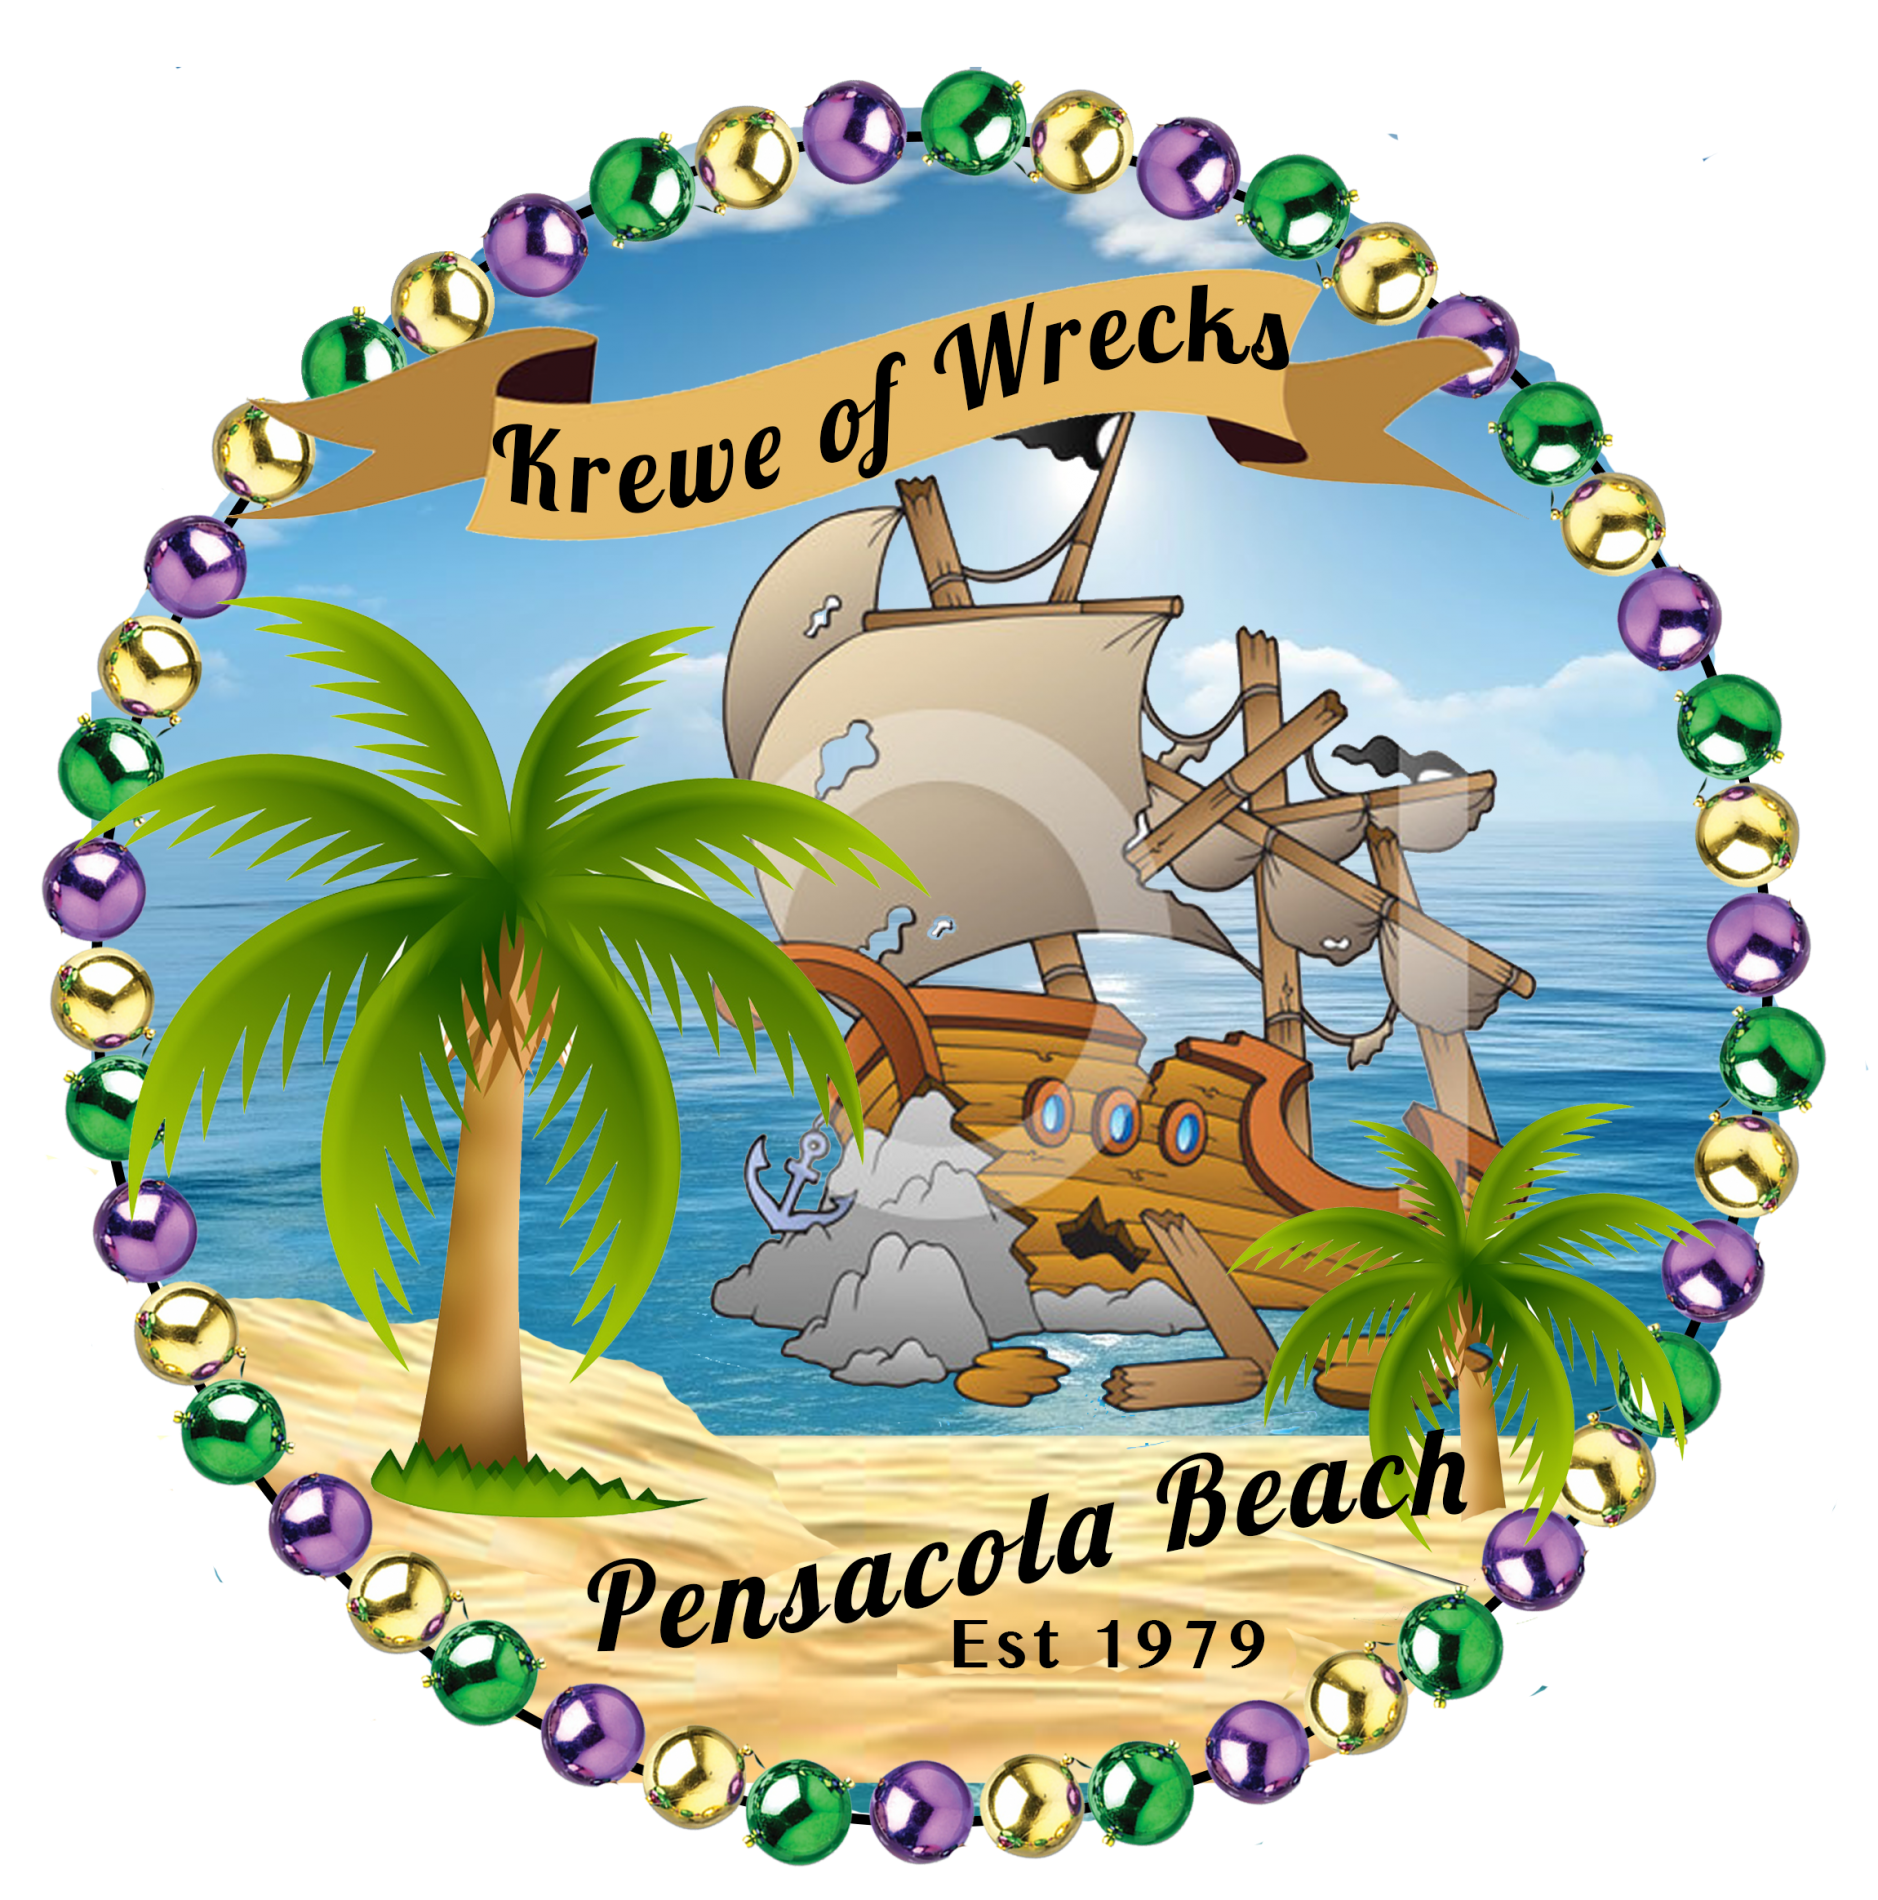 round logo of a shipwreck surrounded by purple, gold, and green beads with banner pronouncing Krewe of Wrecks and Pensacola Beach Est 1979